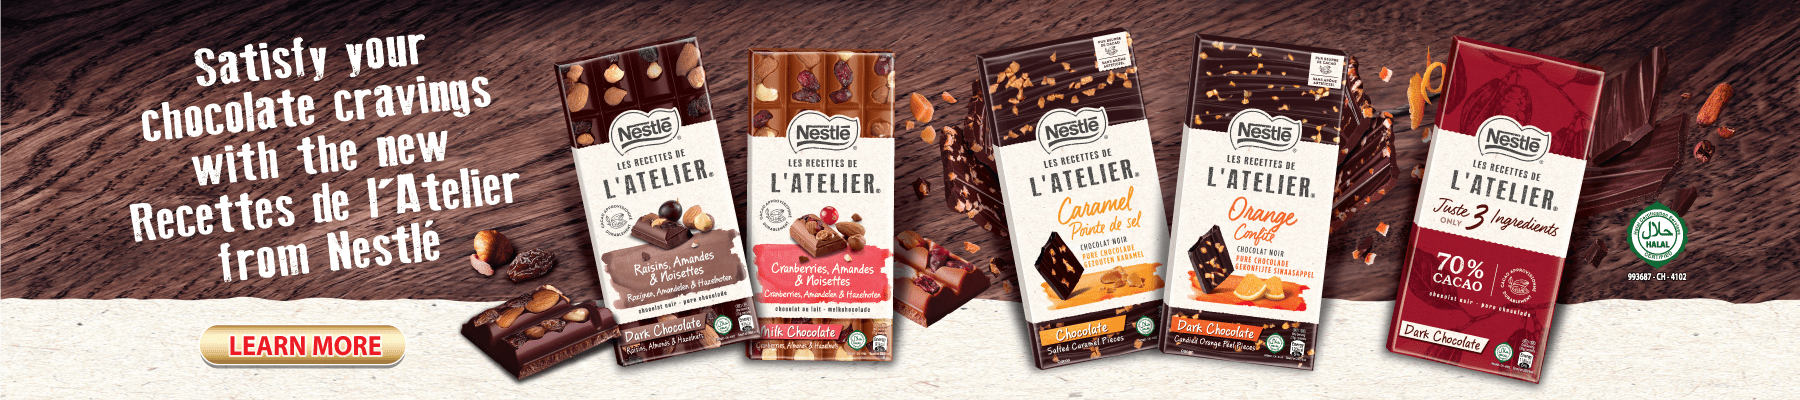 Confectionery LAtelier Banner